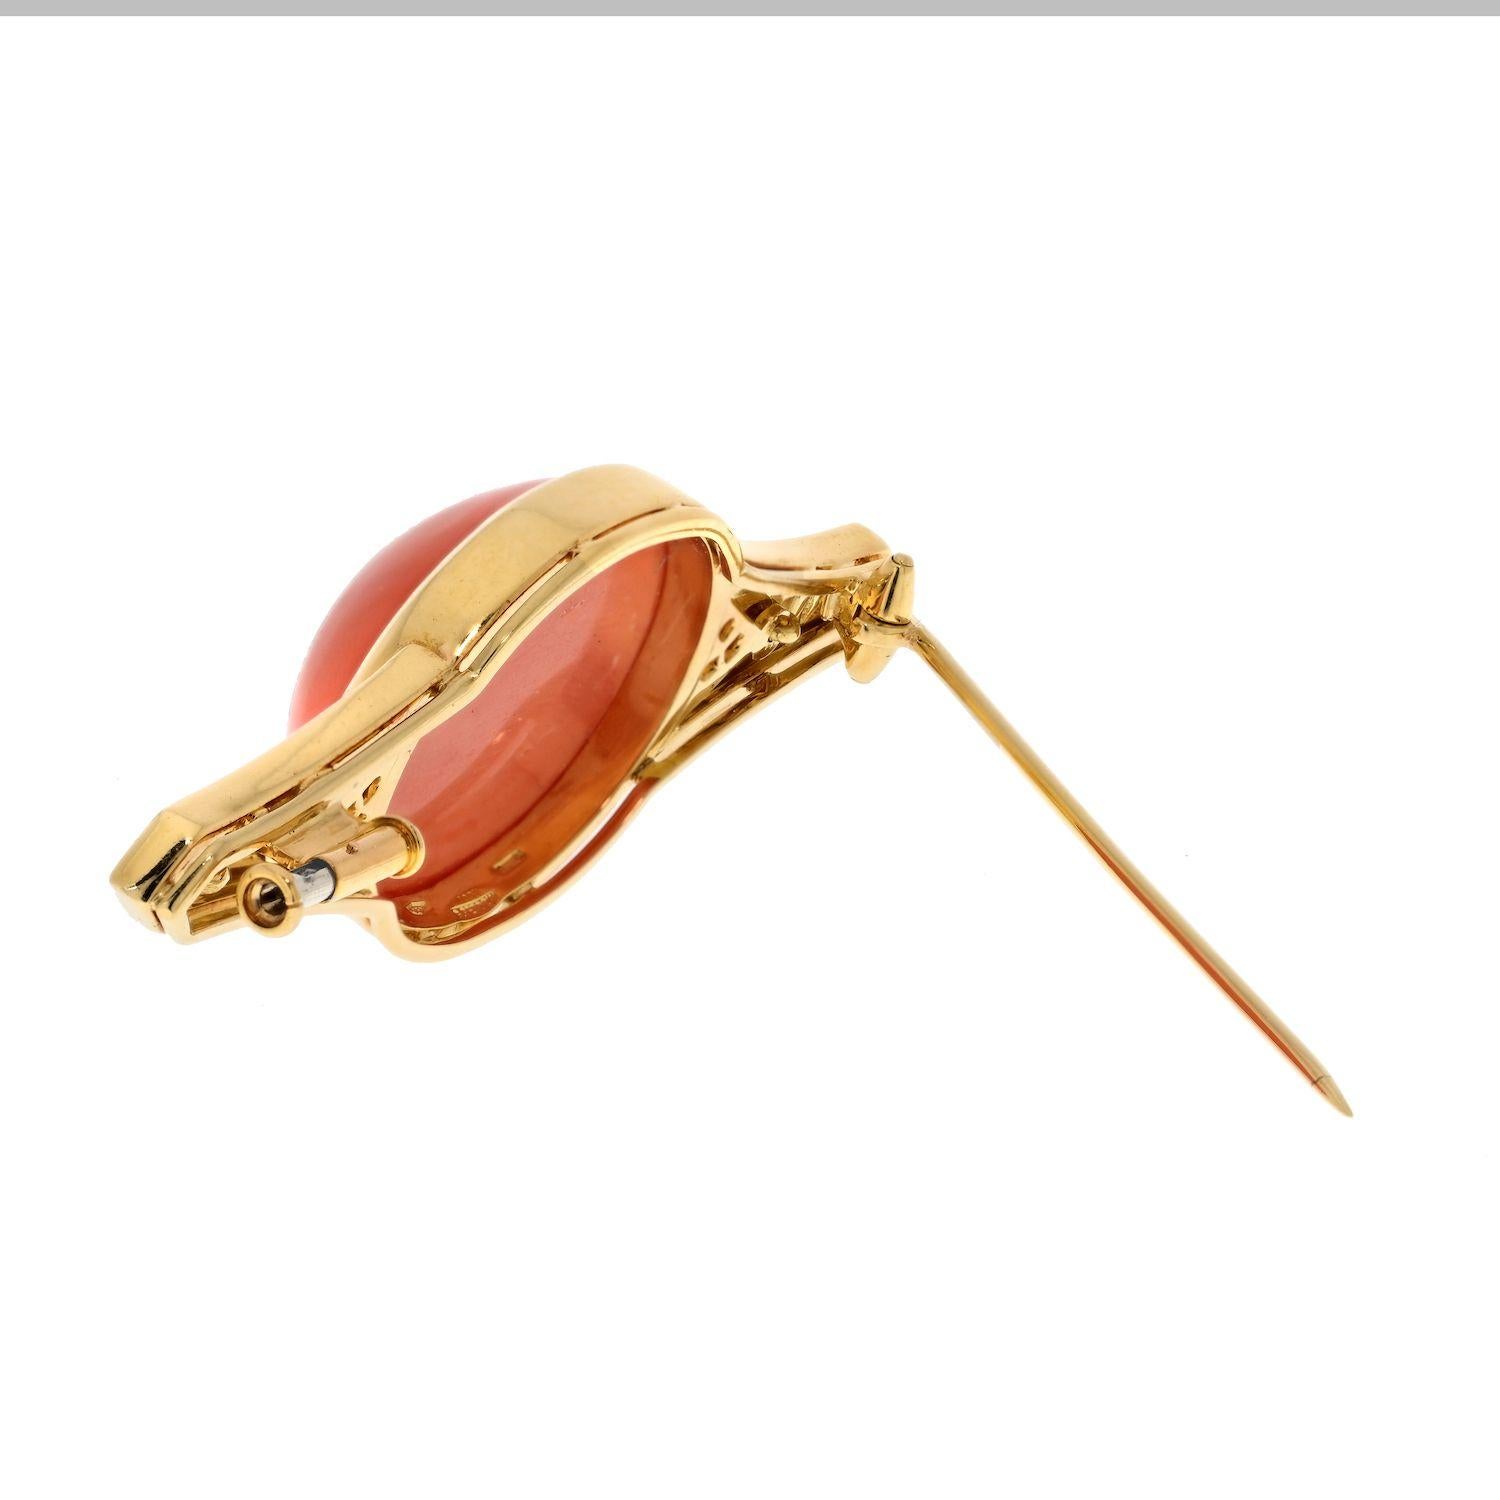 Experience the timeless elegance of an estate Bvlgari 18K Yellow Gold Coral, Black Enamel, and Diamond Brooch. This exceptional piece showcases a vibrant orange cabochon-cut coral, measuring 24mm by 20mm, radiating with the warmth of the